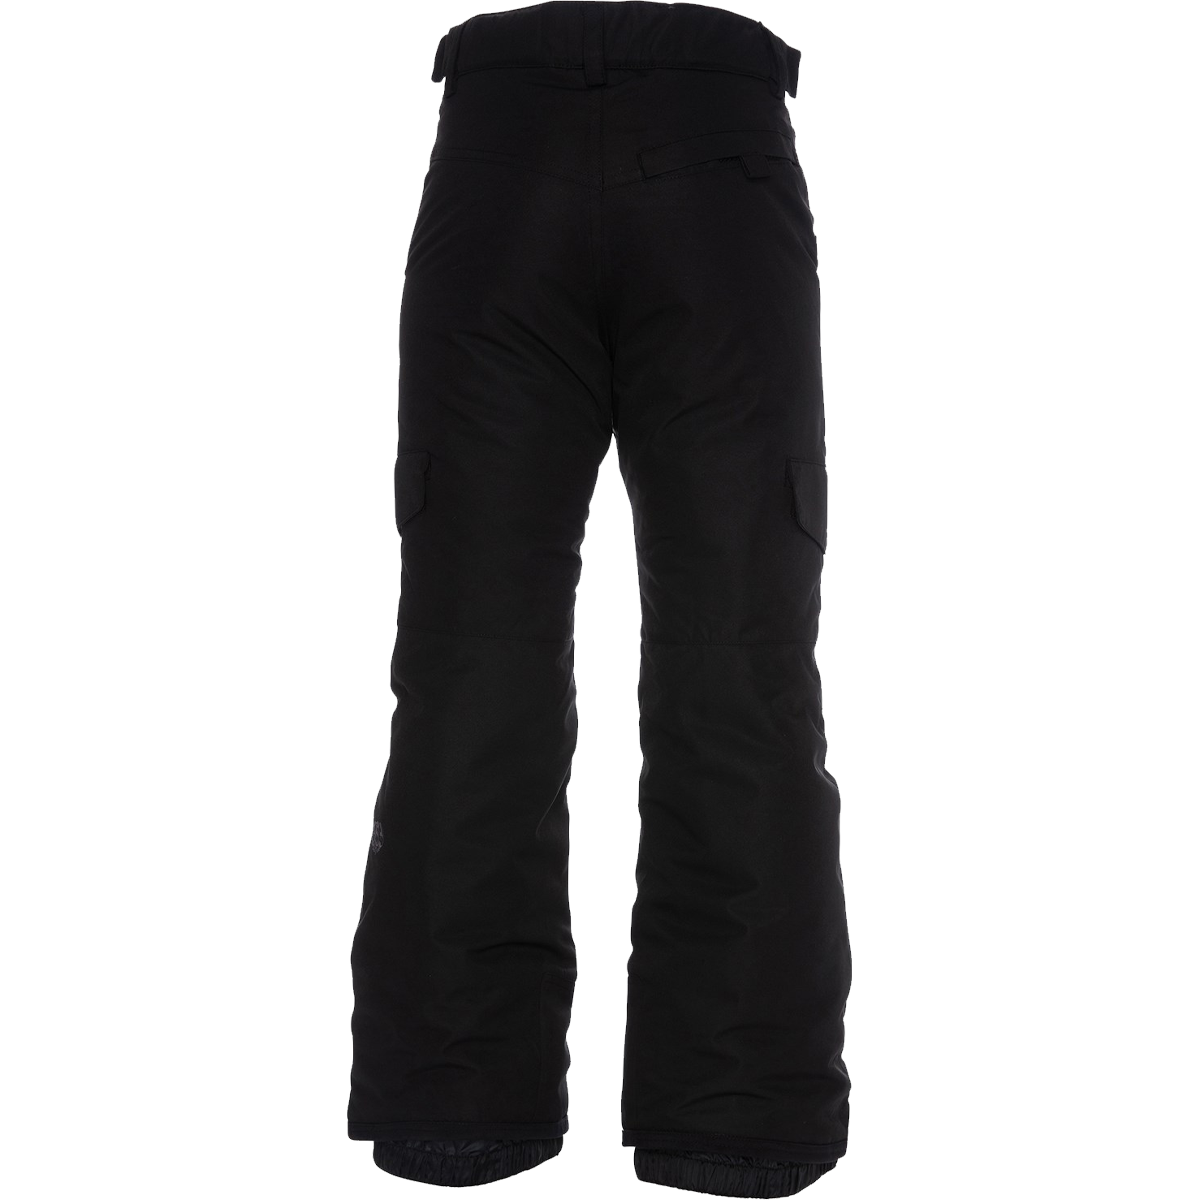 Youth Lola Insulated Pant alternate view